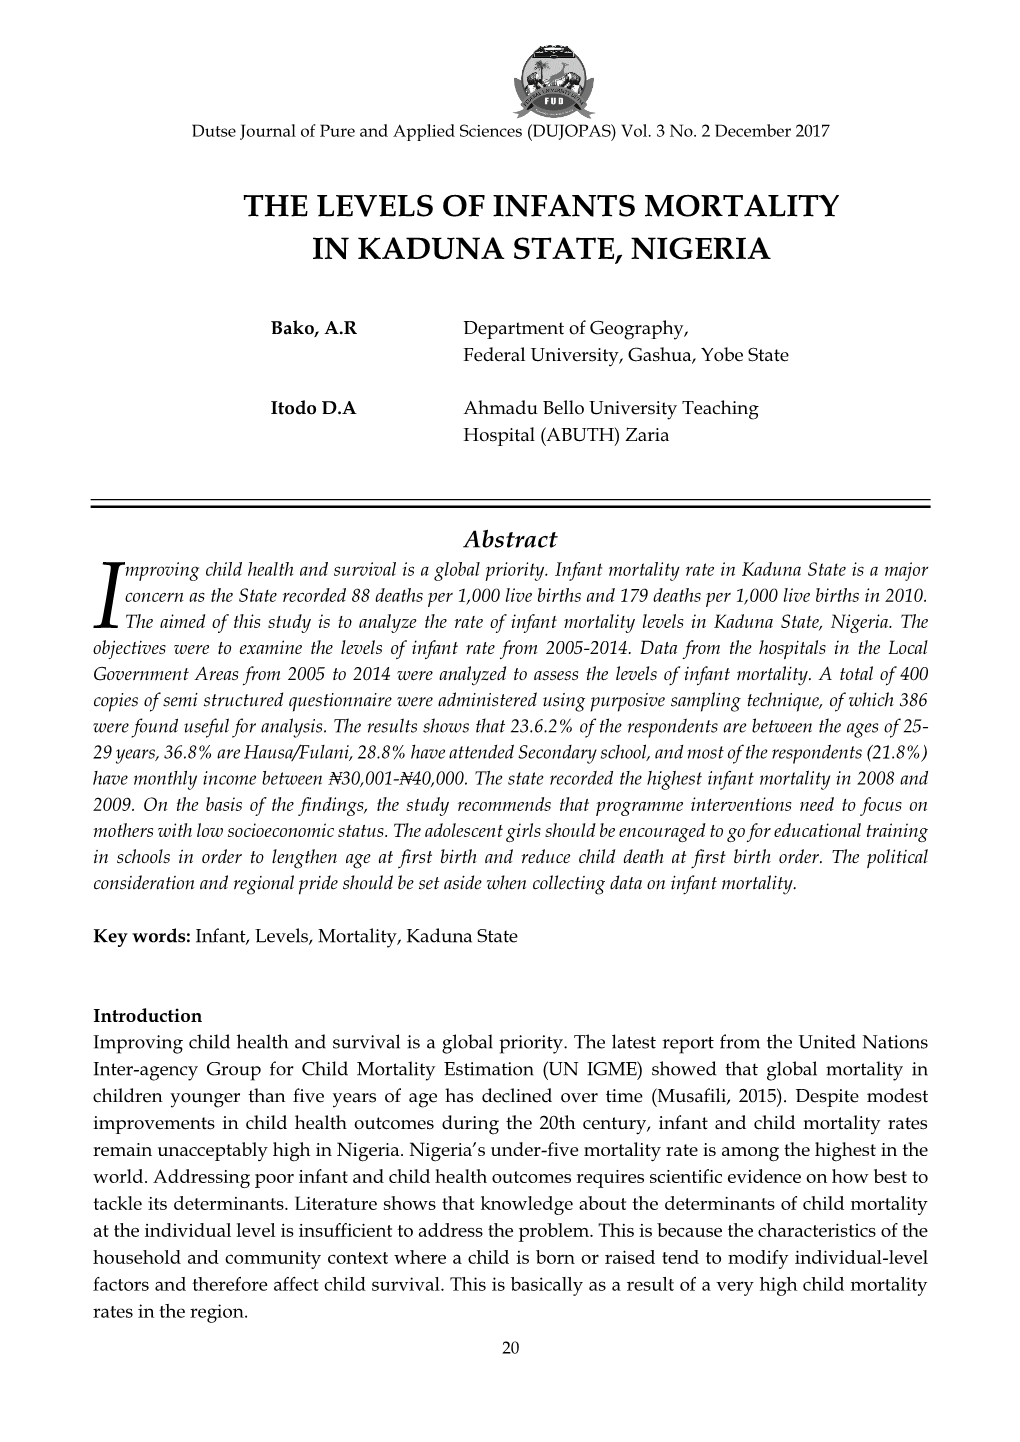 The Levels of Infants Mortality in Kaduna State, Nigeria